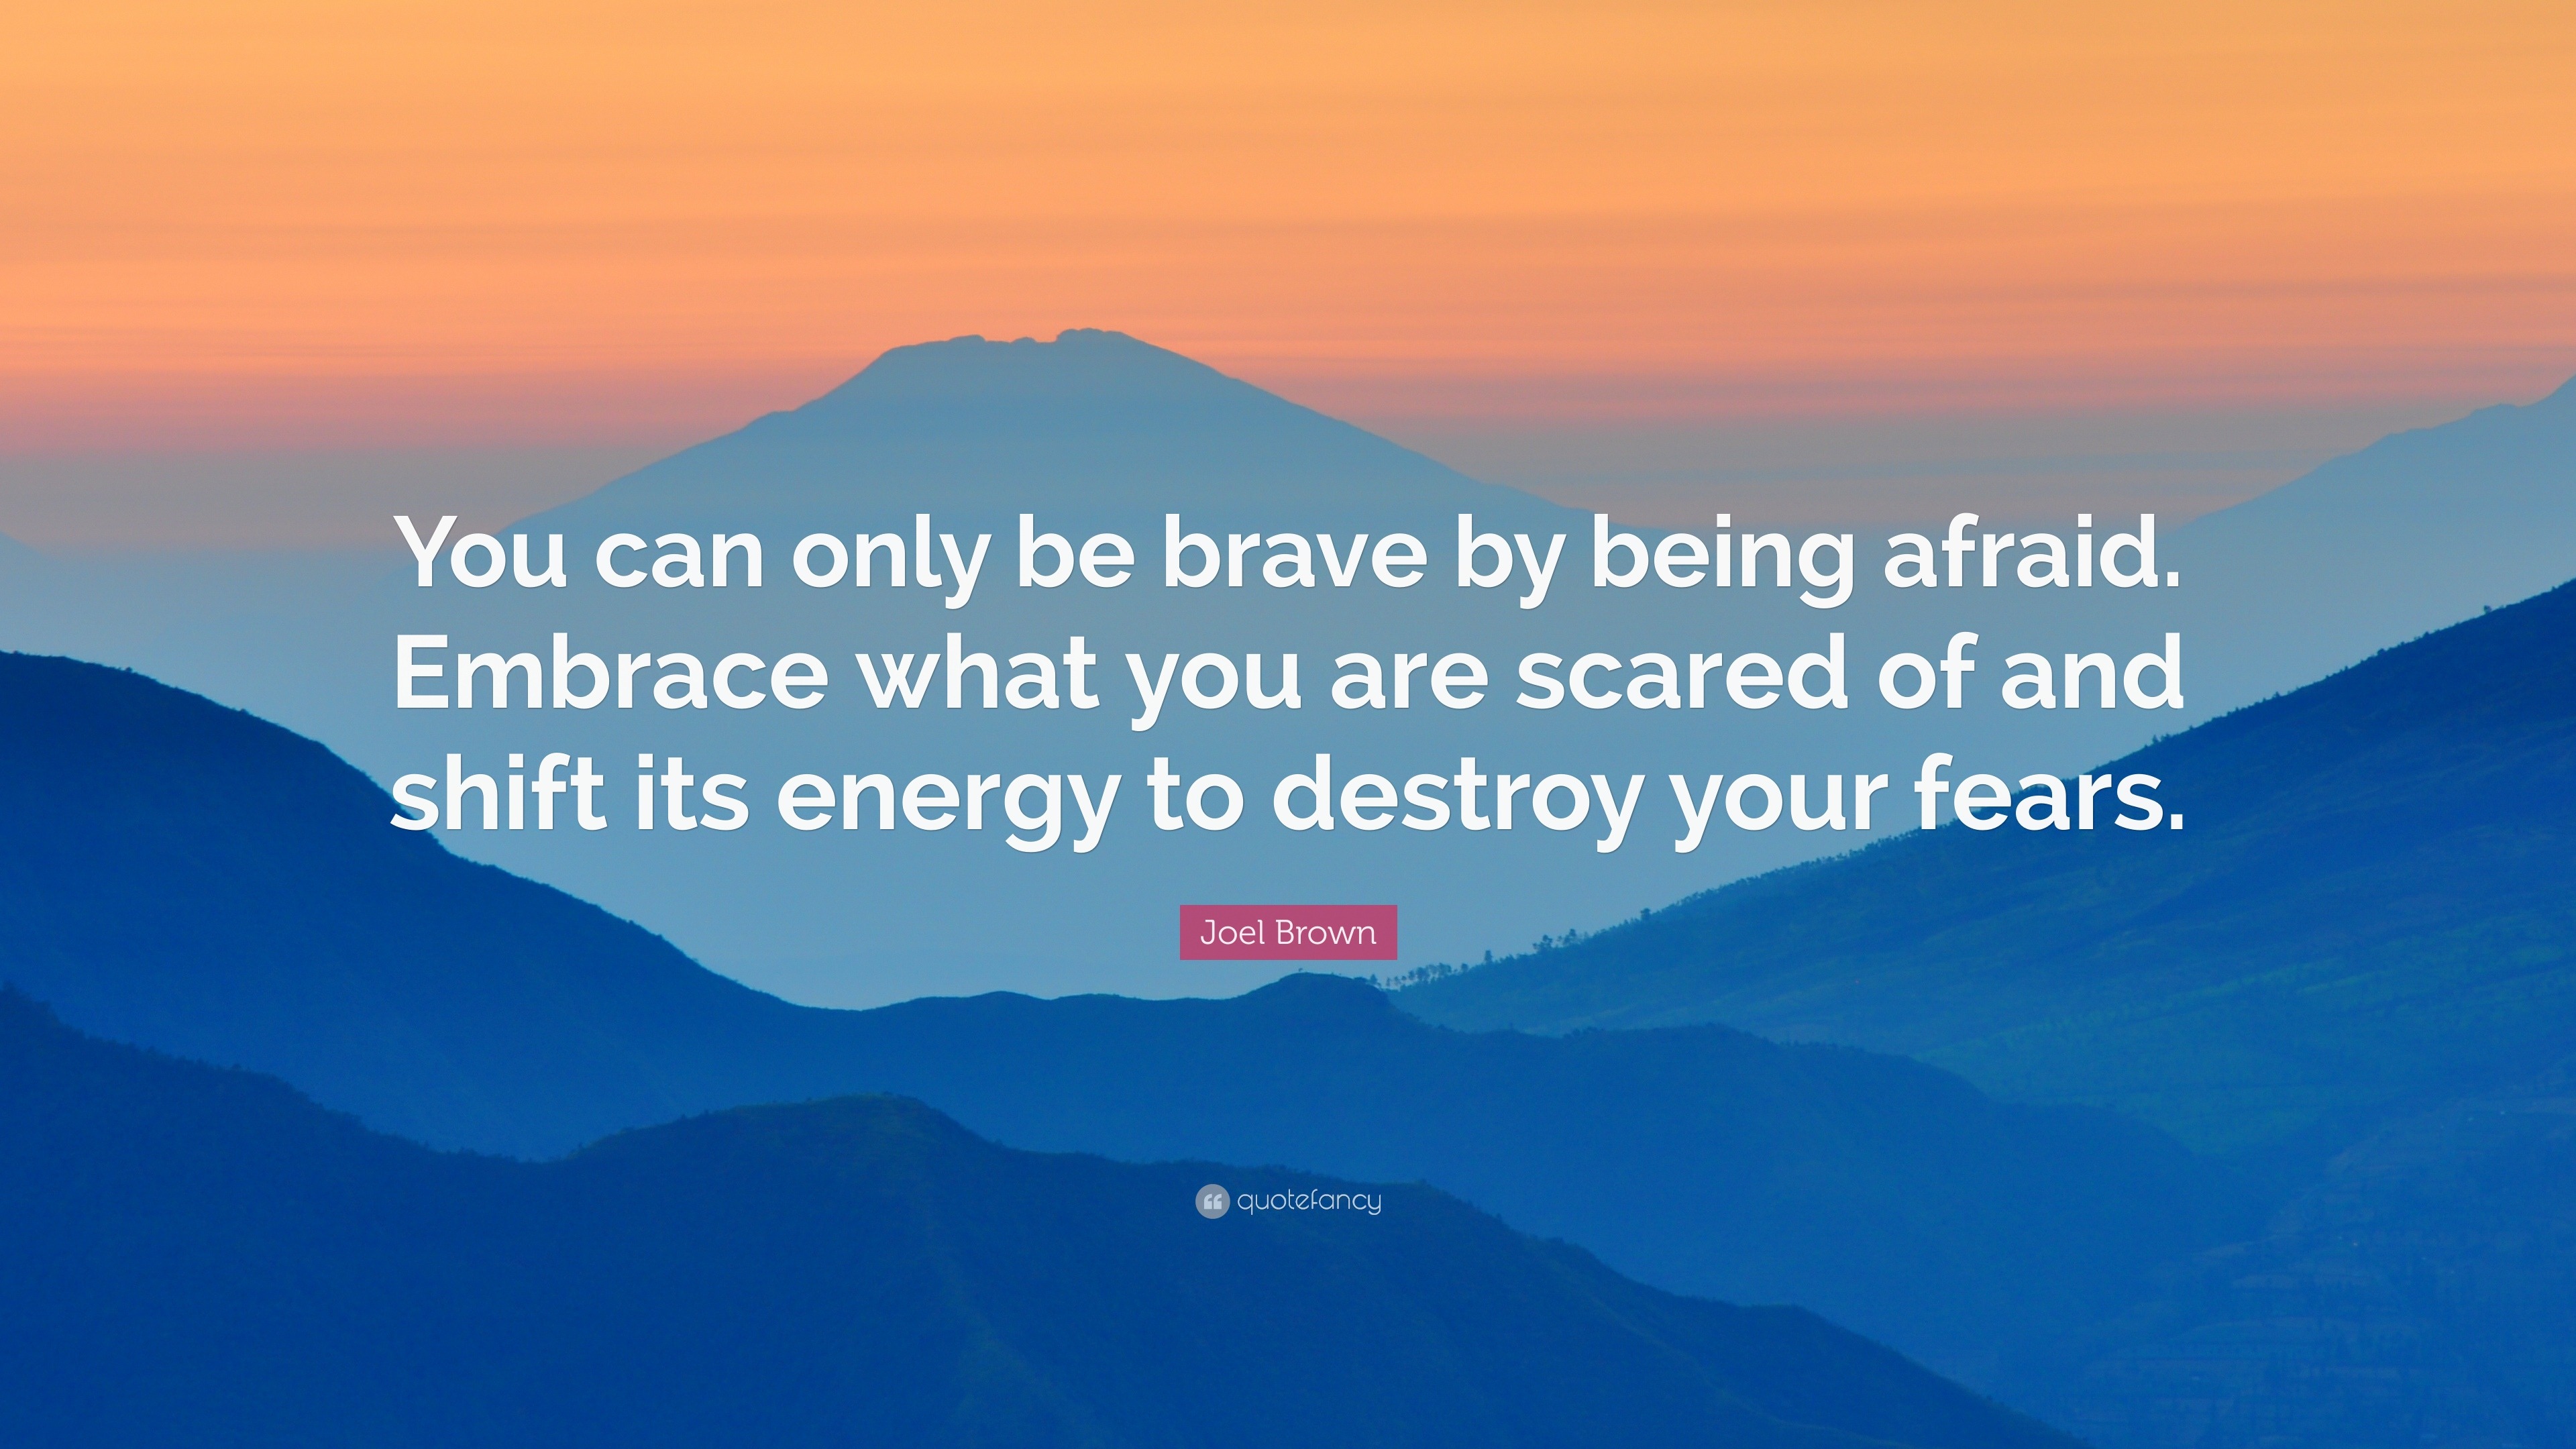 Joel Brown Quote: “You can only be brave by being afraid. Embrace what ...